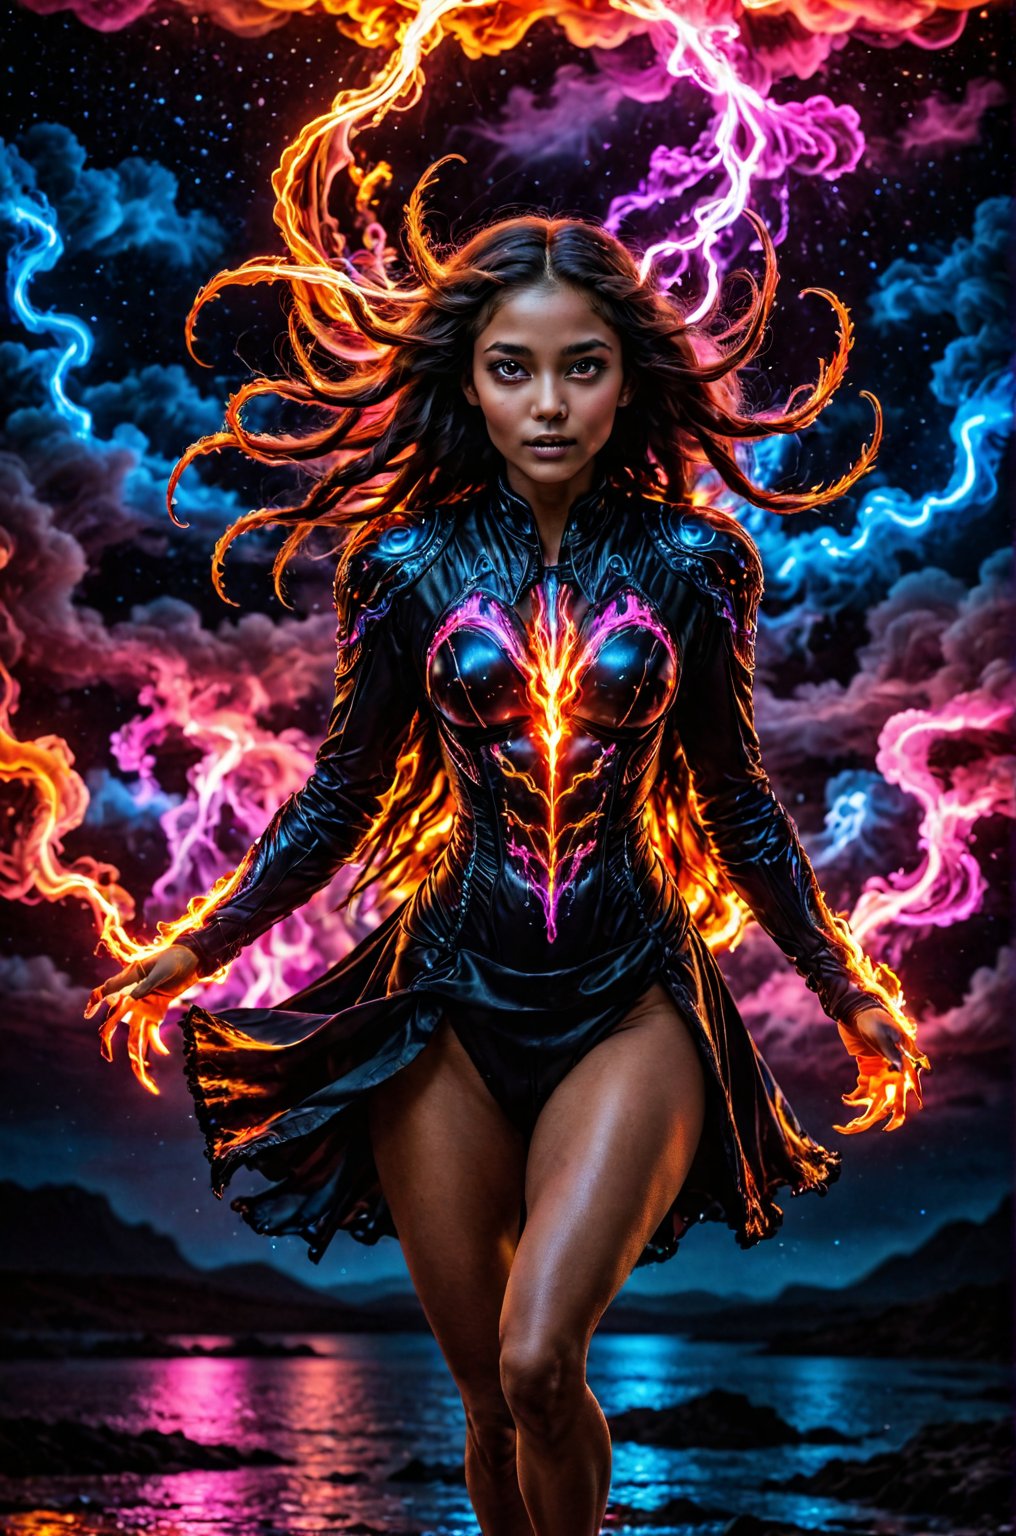 beautiful Indian girl, 23 year old, A visually striking dark fantasy portrait of a majestic girl galloping through a stormy, fiery landscape. The girls's glossy black coat is a stark contrast to its vivid, flame-like mane and tail, which seems to be made of real fire. Its glowing, fiery hooves leave a trail of embers behind, while its intense, glistening eyes reflect a fierce, unbridled energy. The background features a haunting, stormy red sky filled with ominous lightning, adding to the overall sense of mystique and intrigue. This captivating image blends the mediums of photo, painting, and portrait photography to create a unique, conceptual art piece.

